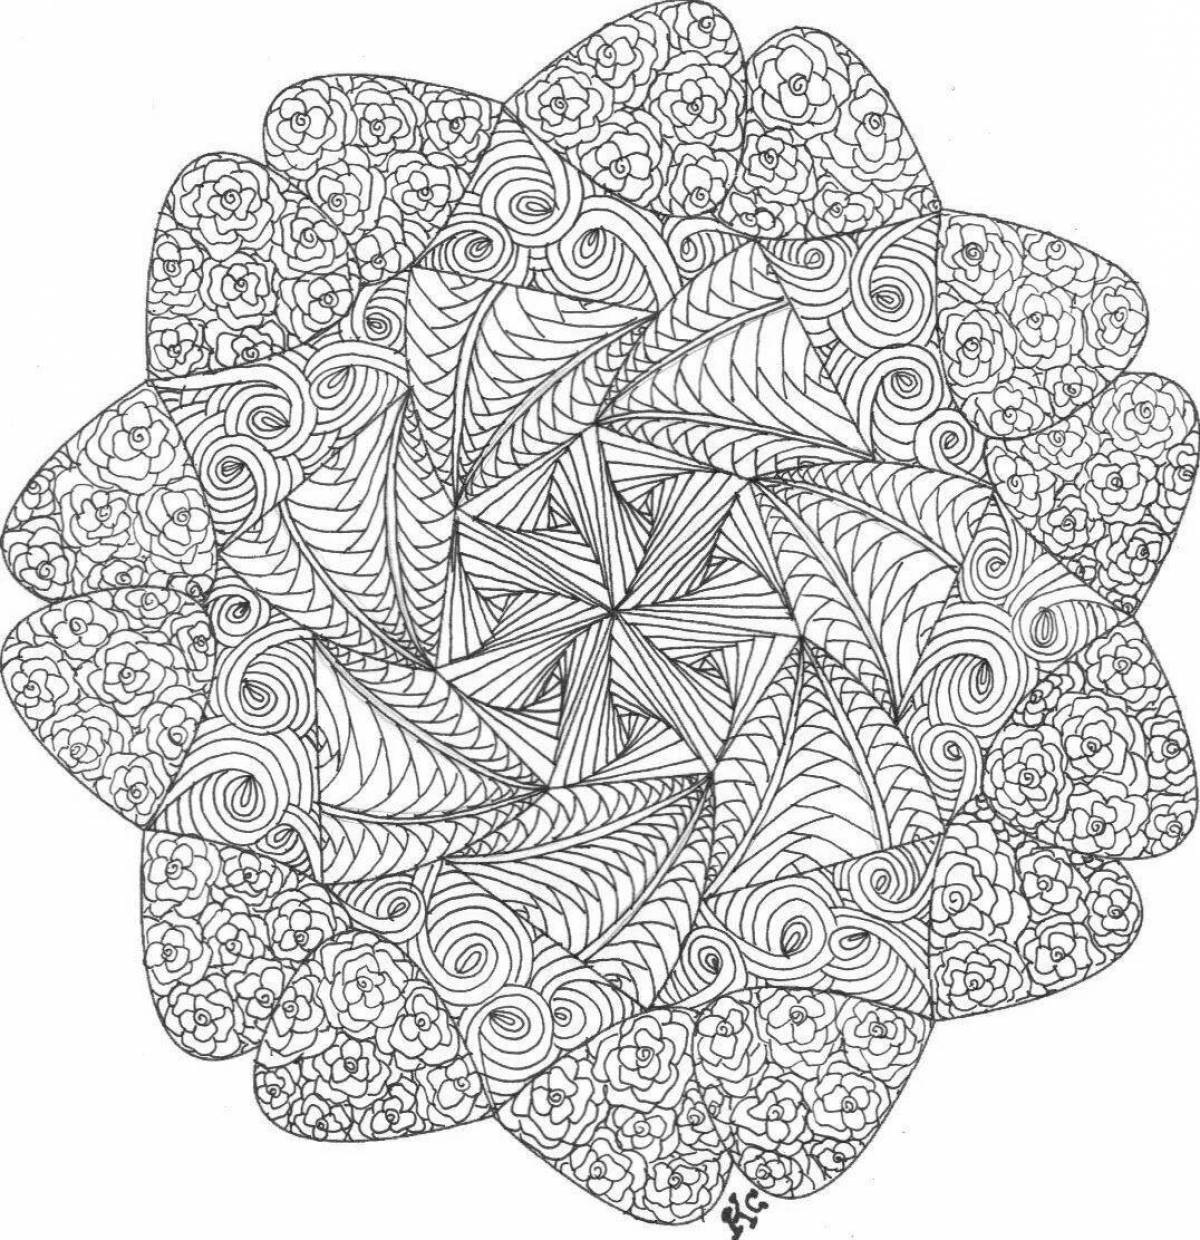 Bright coloring pages with small patterns